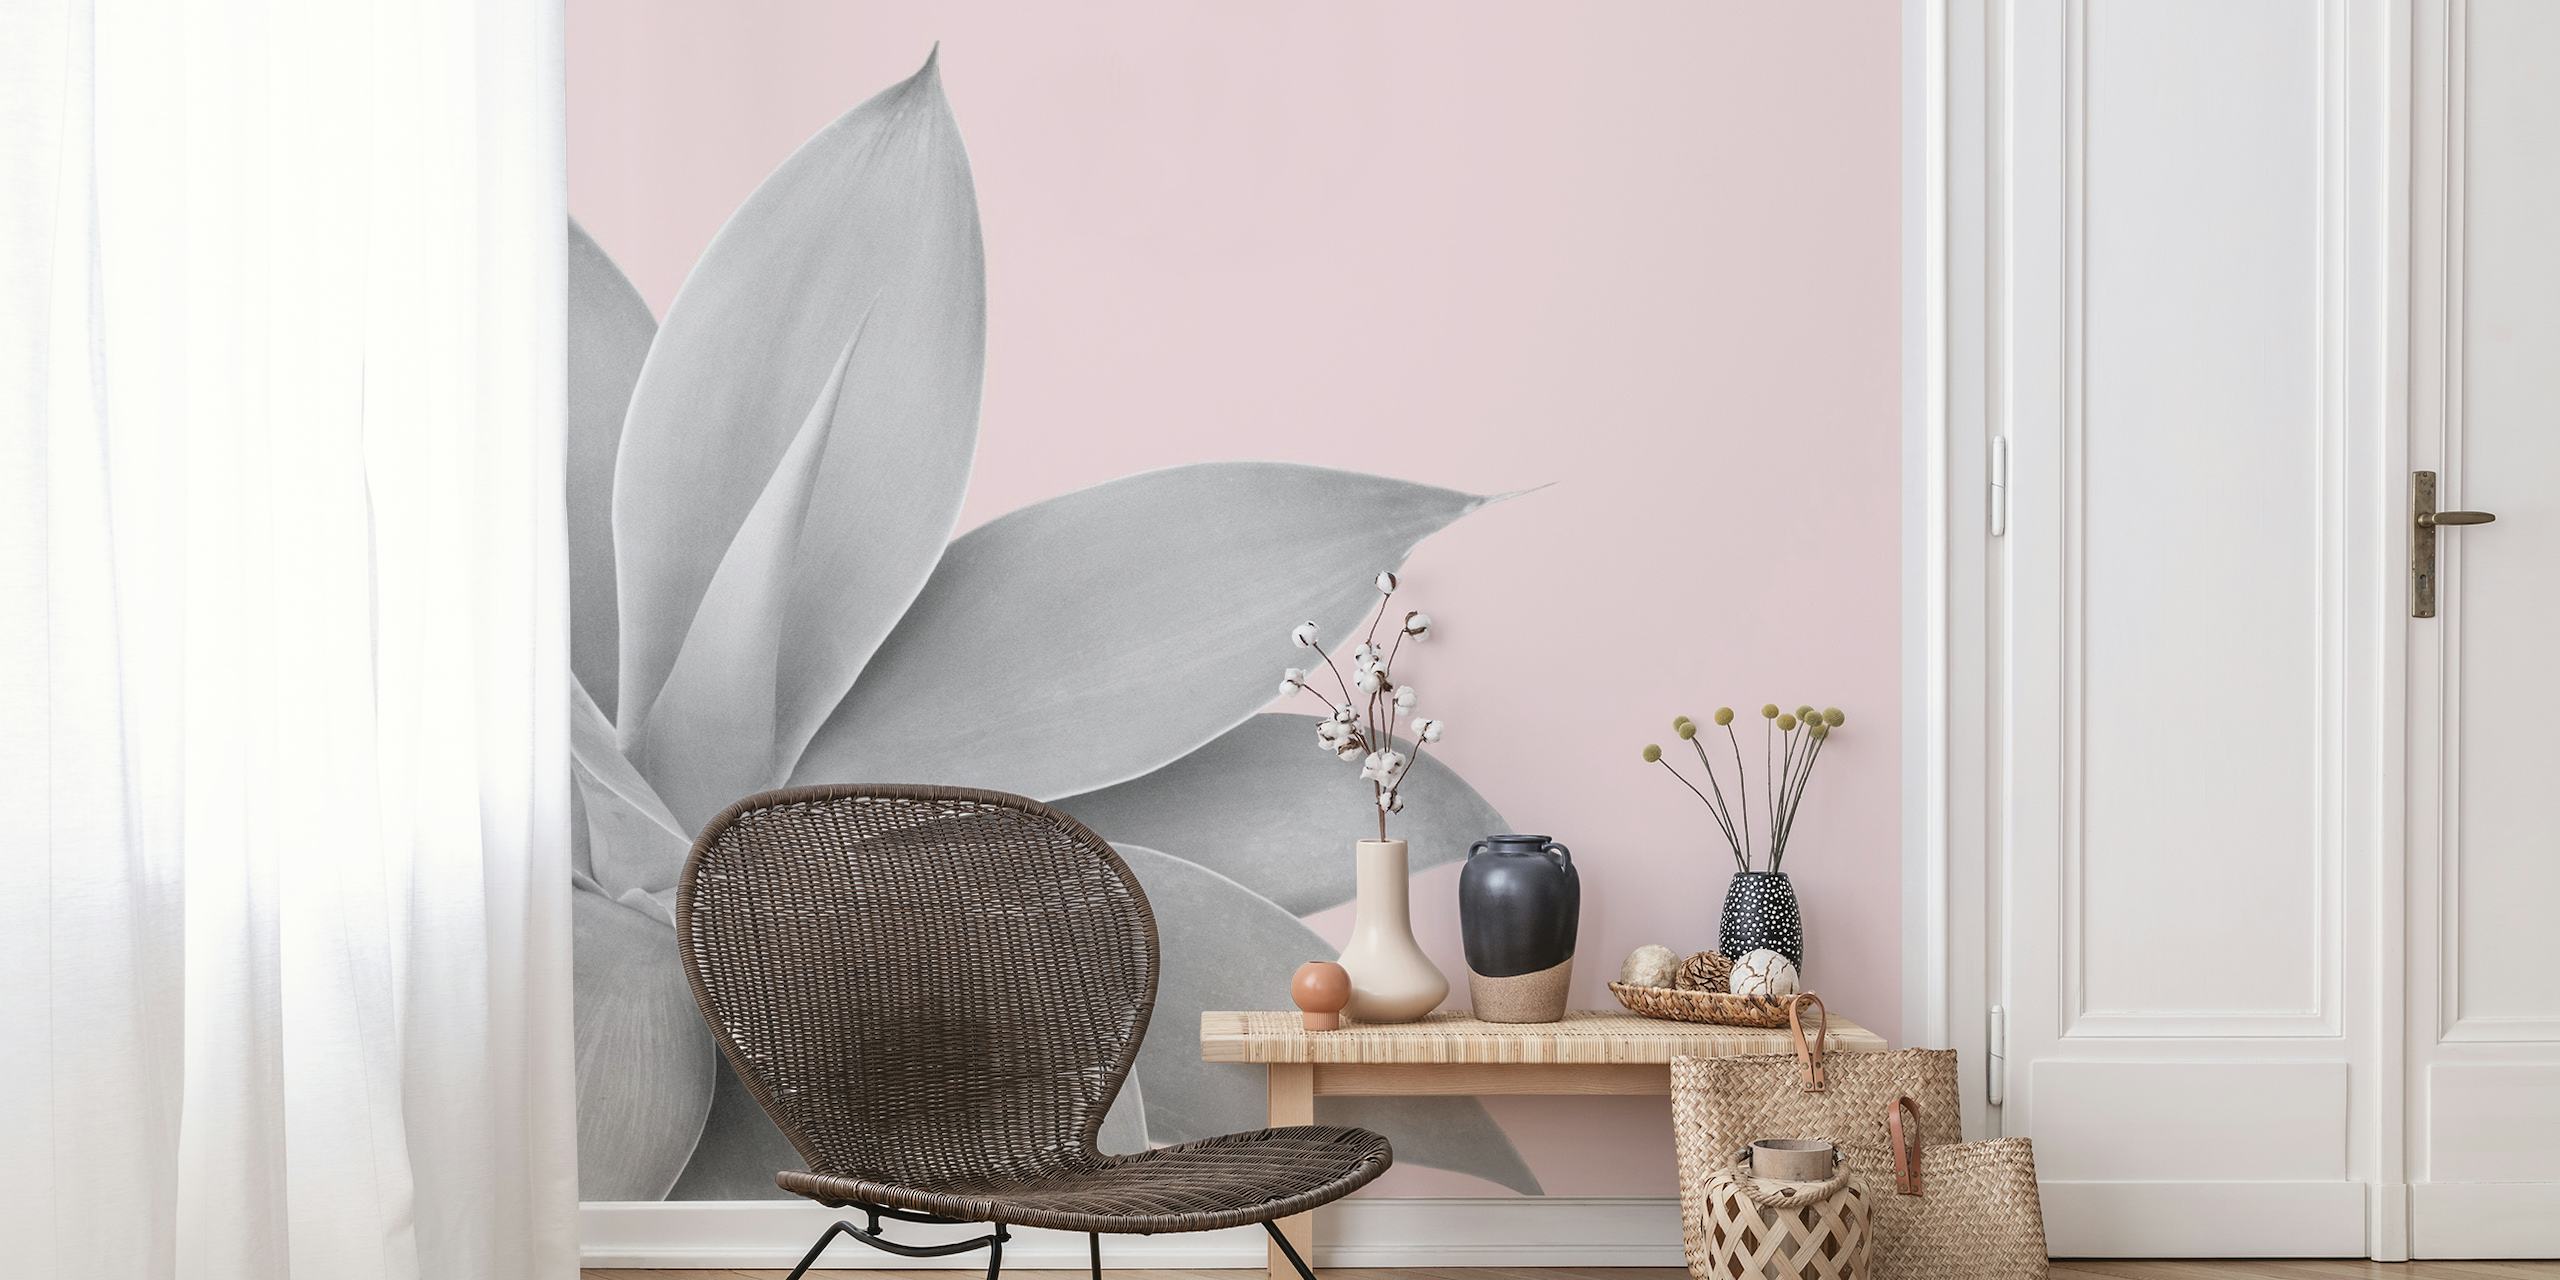 Agave plant grayscale illustration on soft pink background wall mural